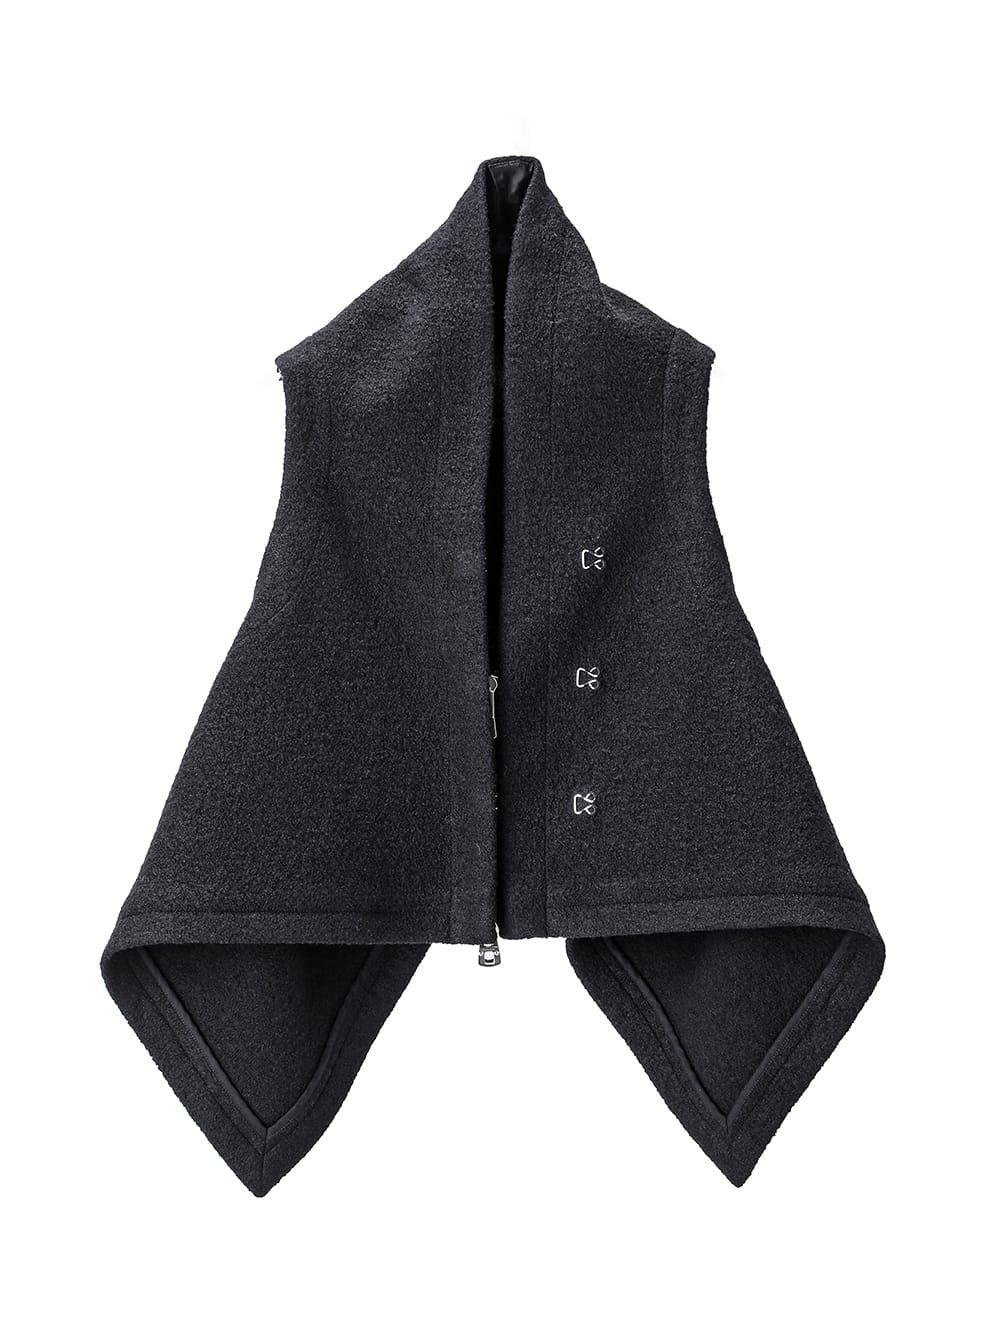 sj.0024AW23-black two-way wrap around micro vest. THE TWO OF US 